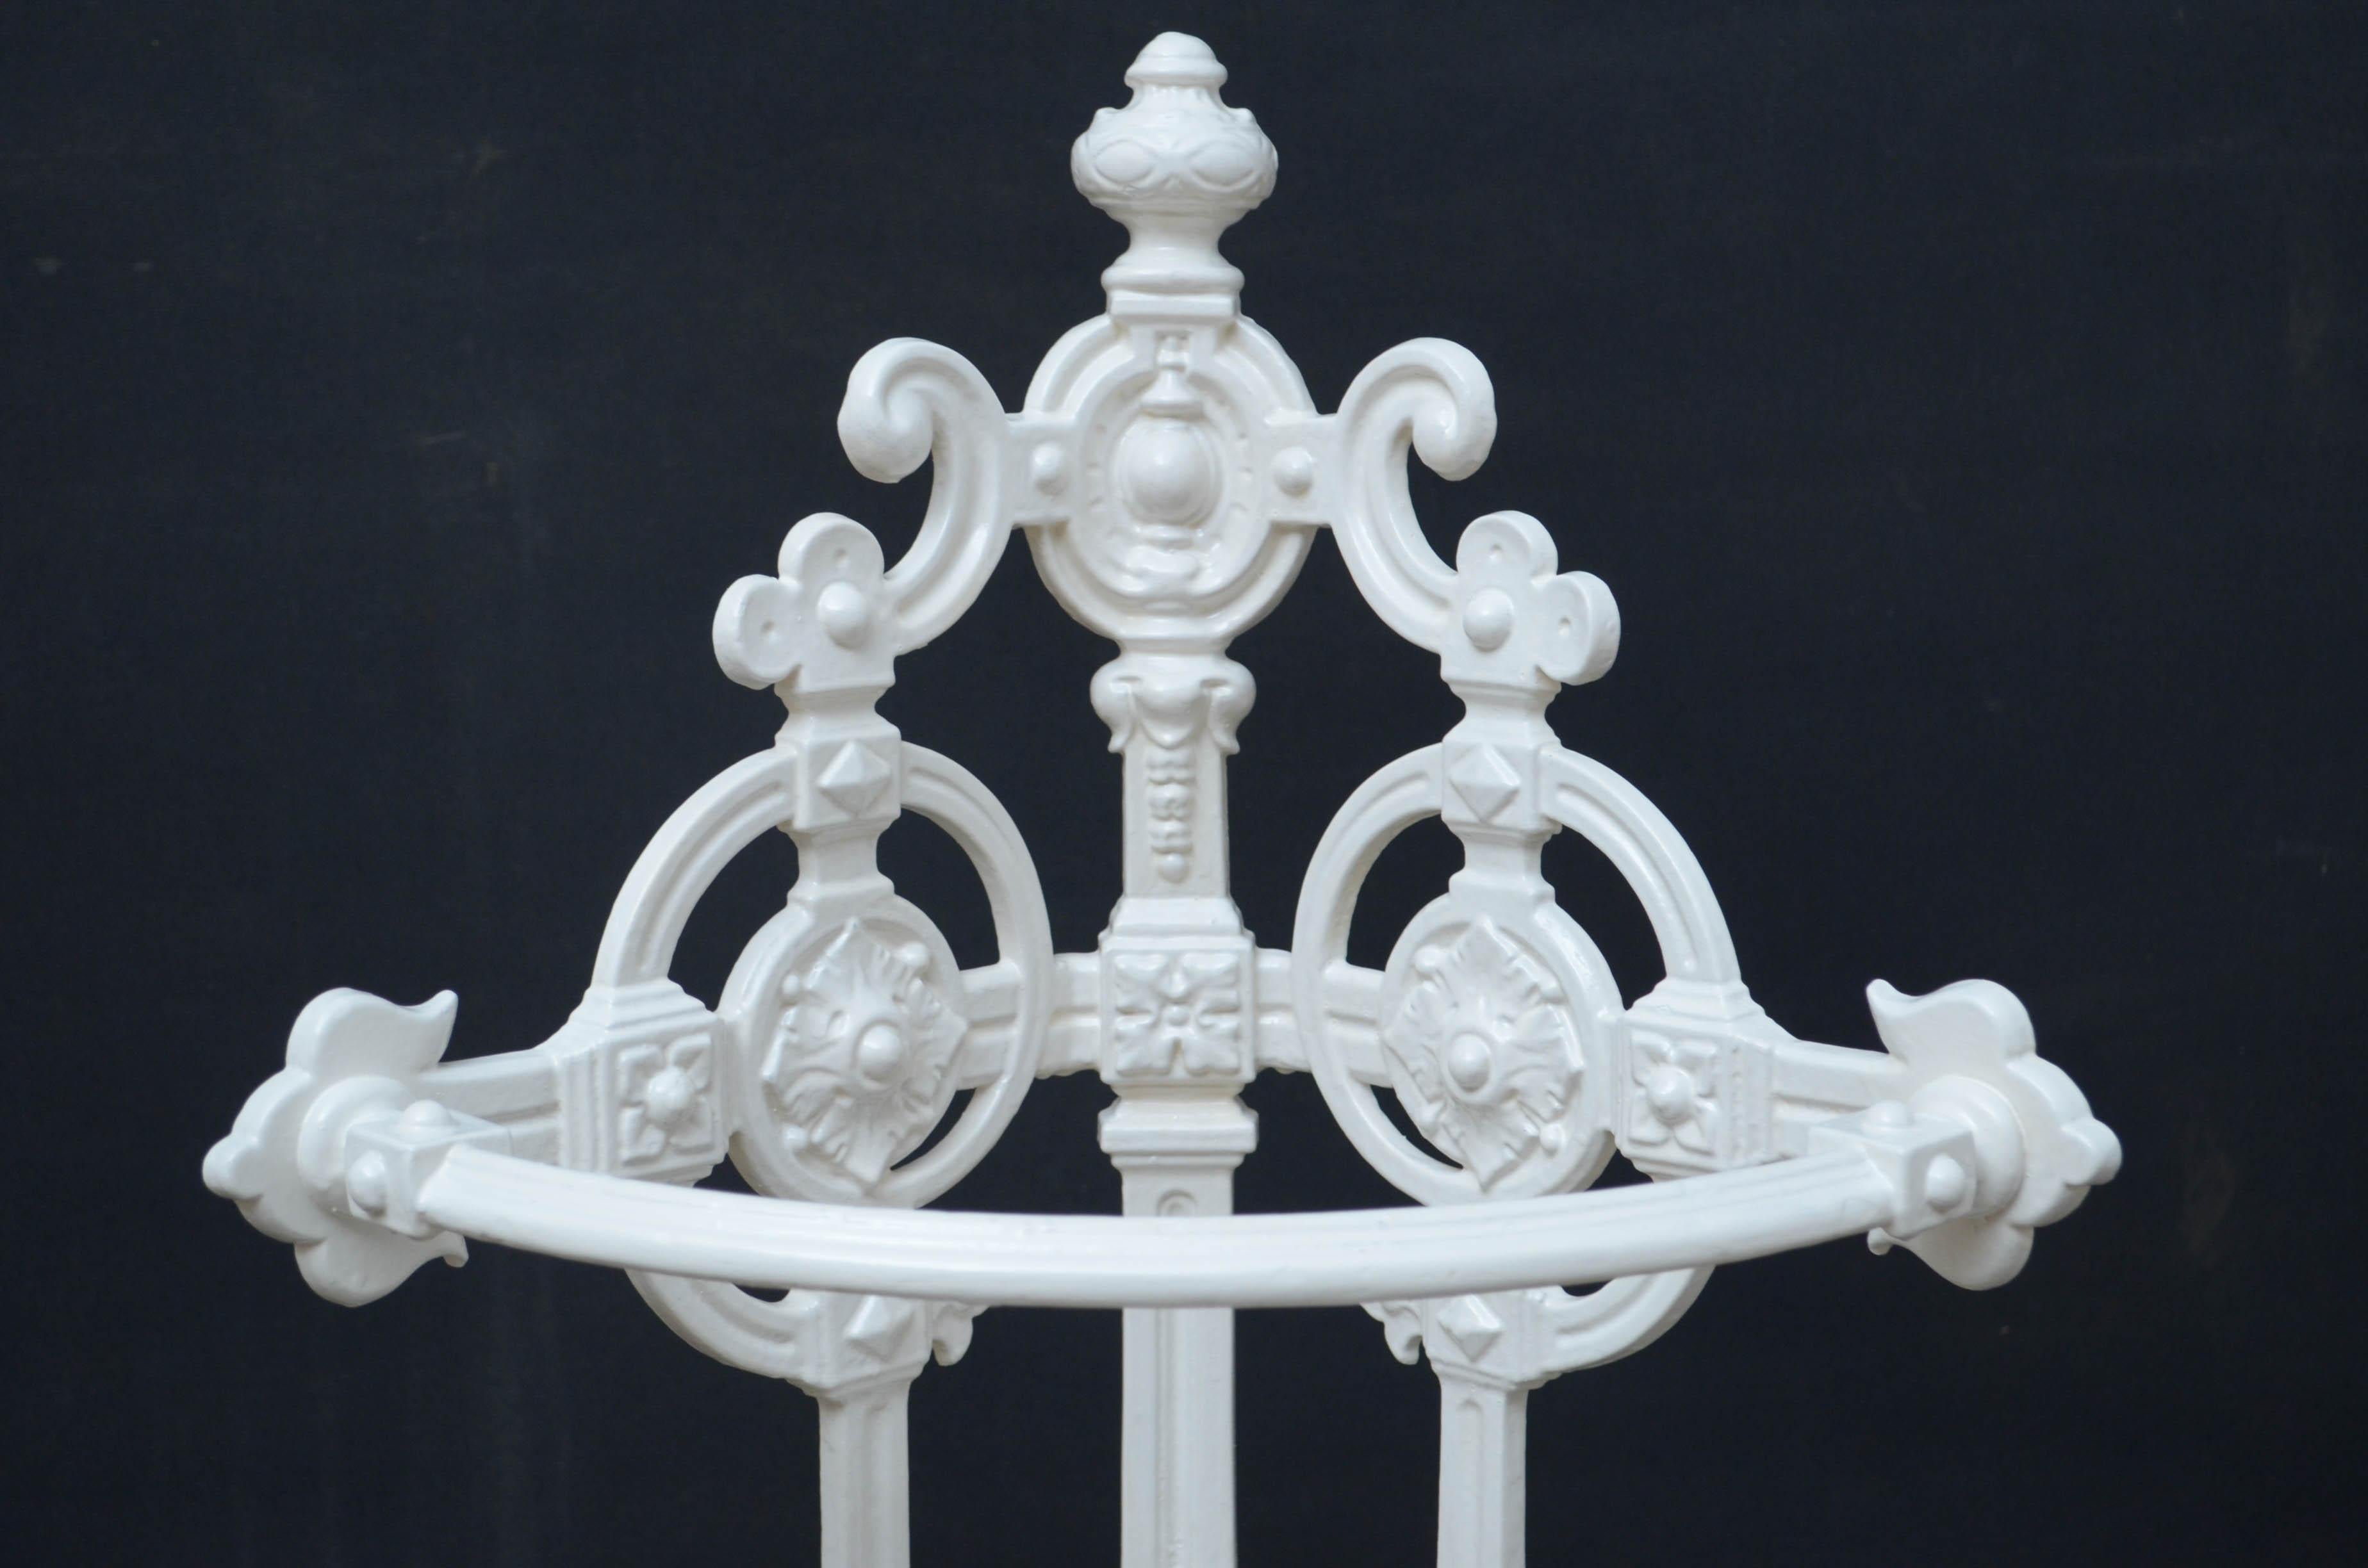 Sn4648 rare Victorian, cast iron, white umbrella stand with floral decorations, scrolls and removable drip tray, stamped at the back with number 49. Ready to place at home, circa 1880
Measures: H 33